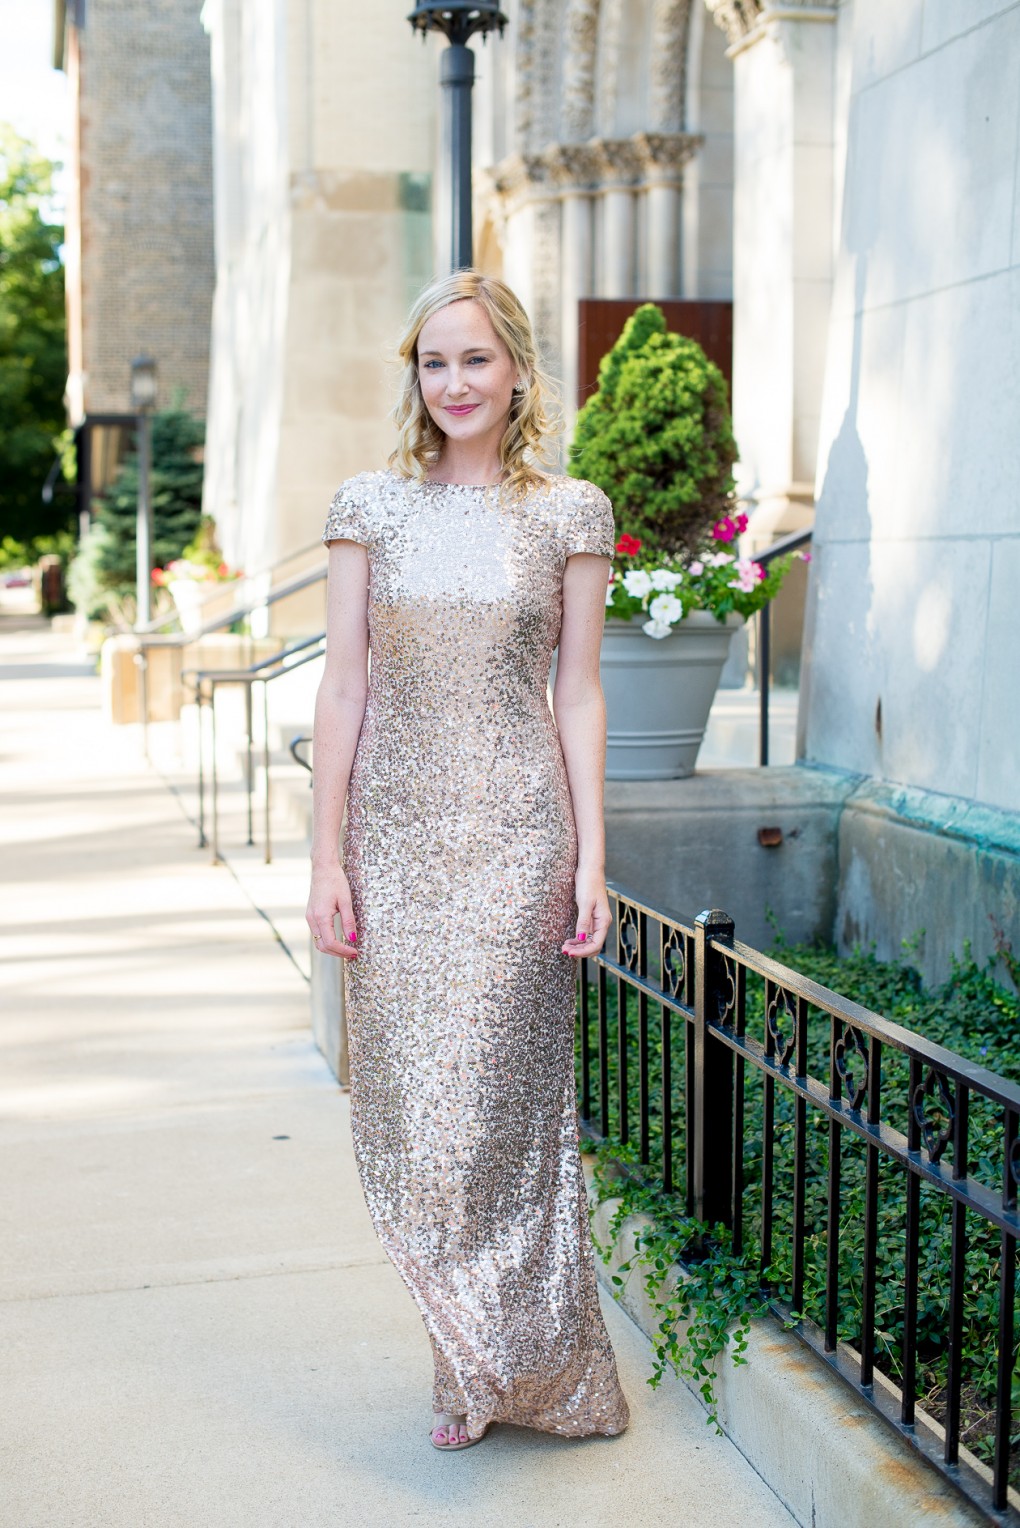 Rent the Runway's Blush & Gold Badgley Mischka Sequined Gown